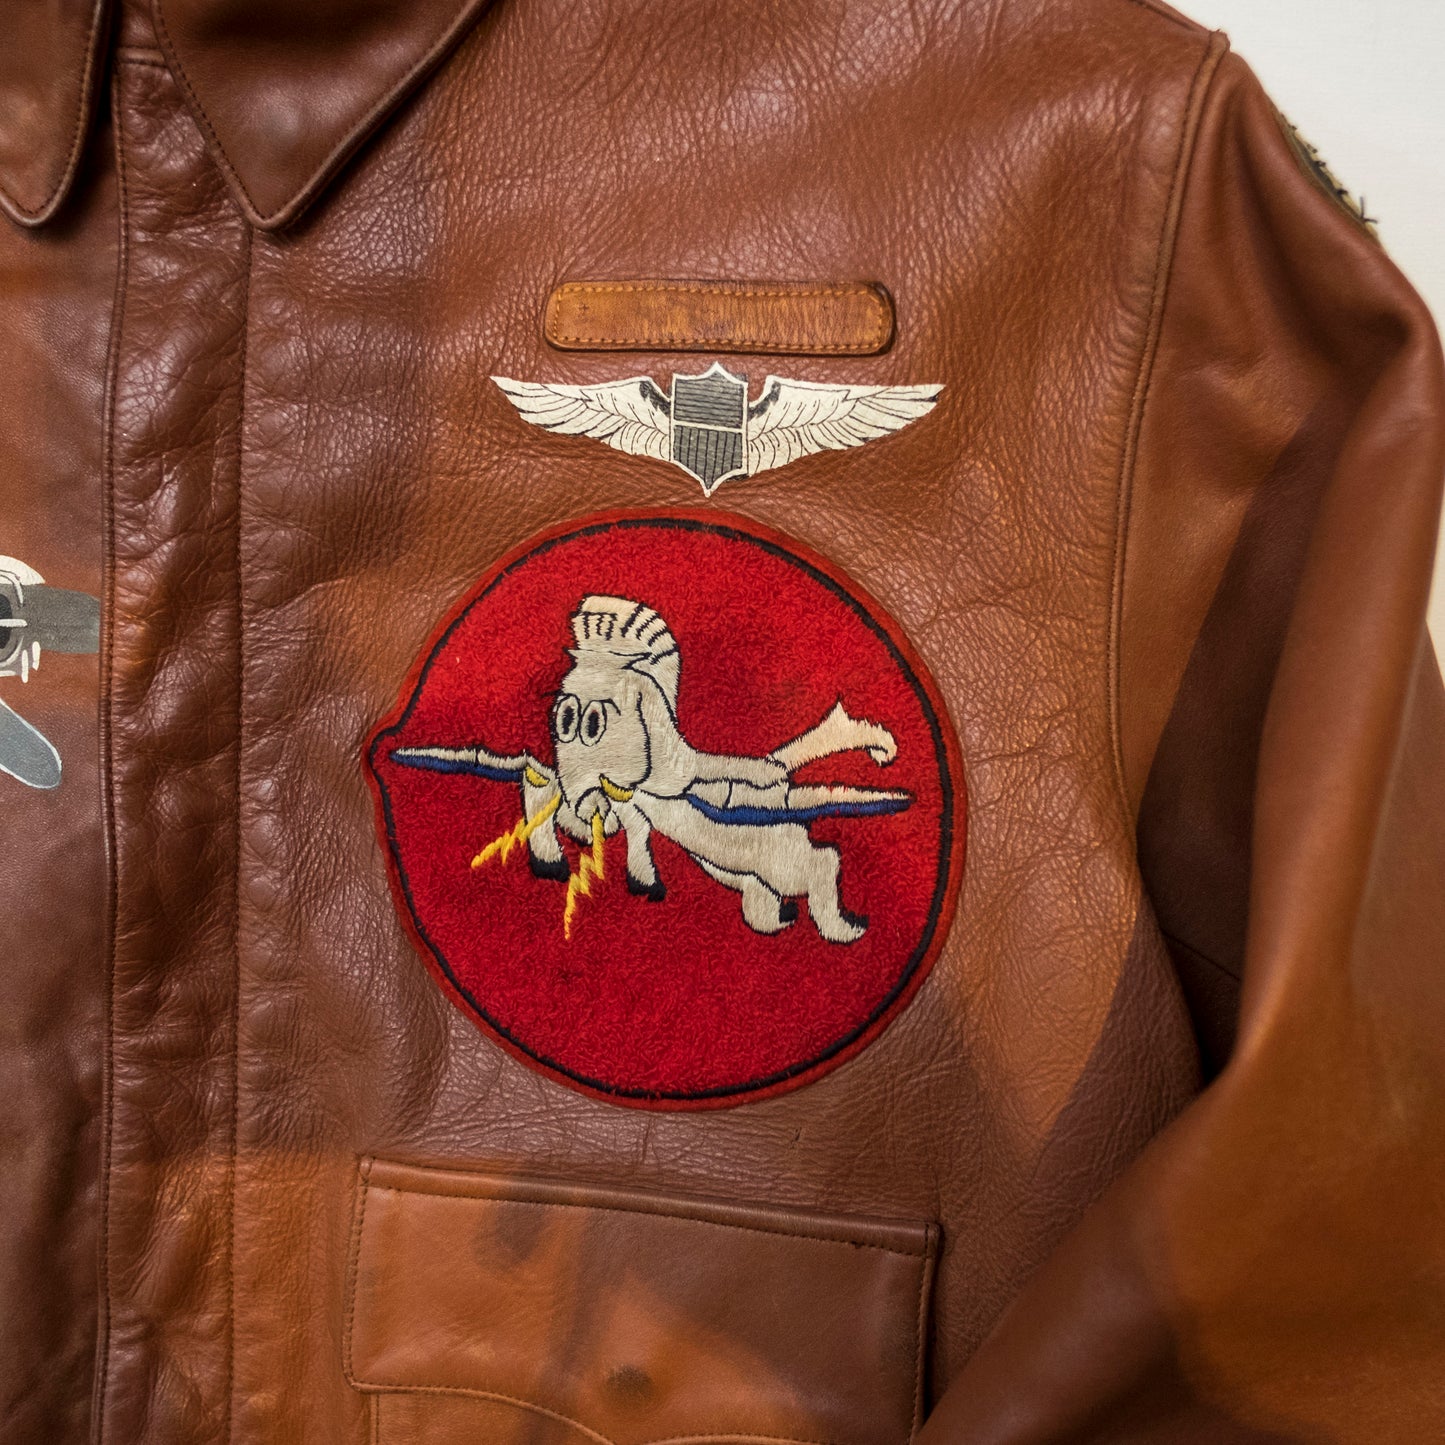 Vintage A-2 Handpainted Hand Paint Military Flight Leather Bomber Jacket